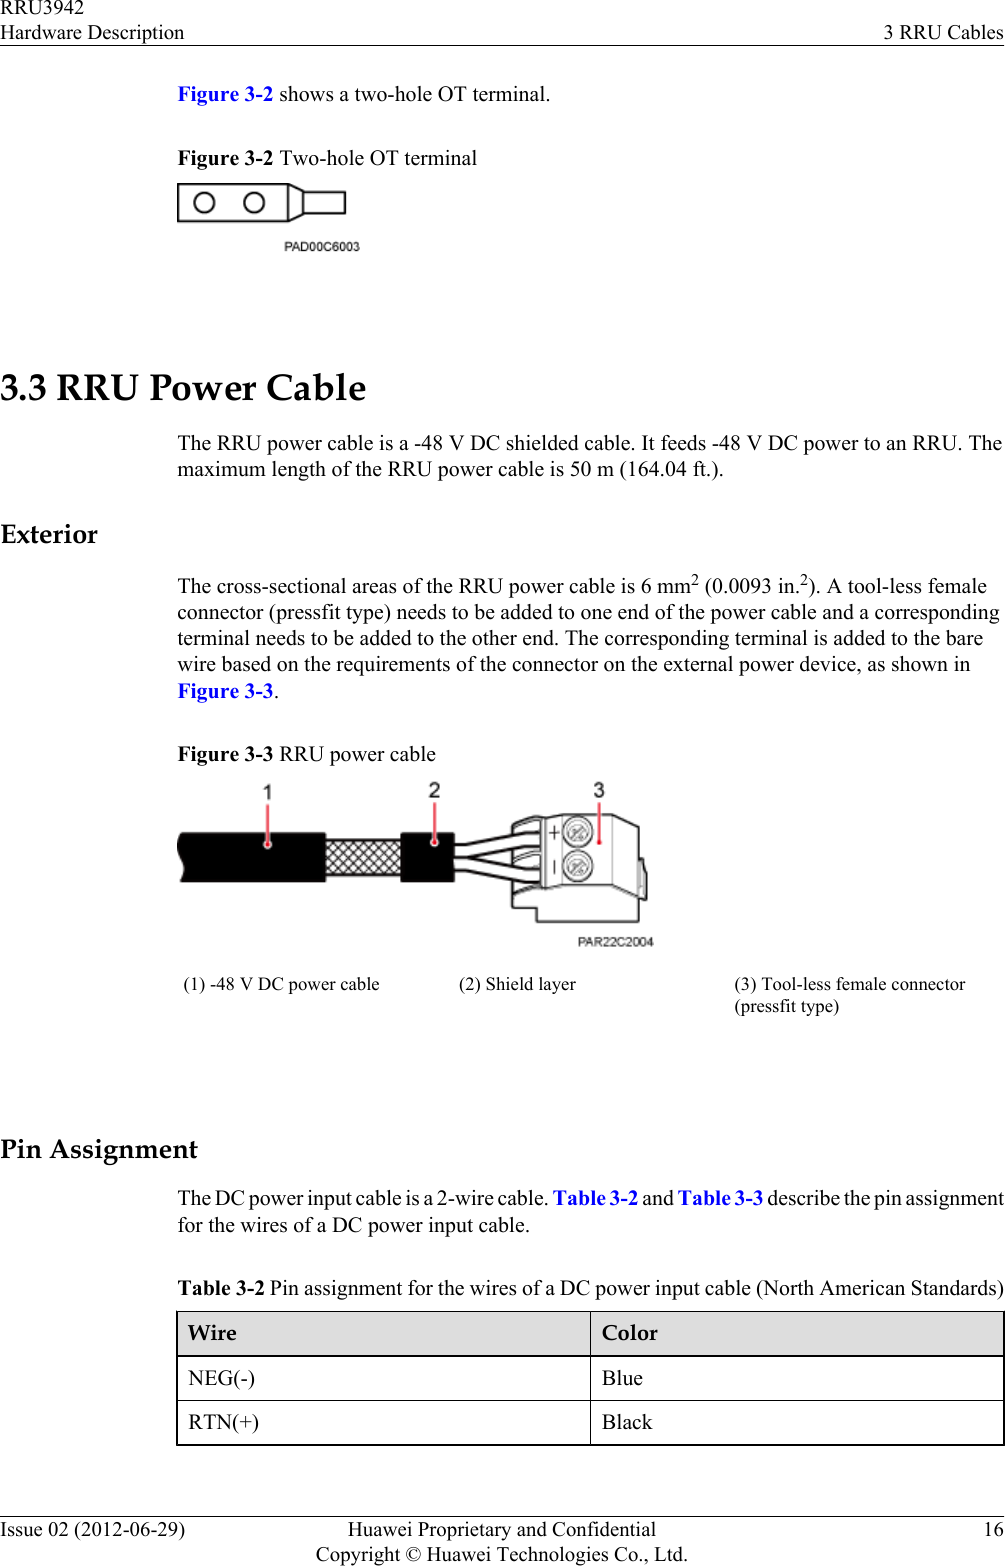 Figure 3-2 shows a two-hole OT terminal.Figure 3-2 Two-hole OT terminal 3.3 RRU Power CableThe RRU power cable is a -48 V DC shielded cable. It feeds -48 V DC power to an RRU. Themaximum length of the RRU power cable is 50 m (164.04 ft.).ExteriorThe cross-sectional areas of the RRU power cable is 6 mm2 (0.0093 in.2). A tool-less femaleconnector (pressfit type) needs to be added to one end of the power cable and a correspondingterminal needs to be added to the other end. The corresponding terminal is added to the barewire based on the requirements of the connector on the external power device, as shown inFigure 3-3.Figure 3-3 RRU power cable(1) -48 V DC power cable (2) Shield layer (3) Tool-less female connector(pressfit type) Pin AssignmentThe DC power input cable is a 2-wire cable. Table 3-2 and Table 3-3 describe the pin assignmentfor the wires of a DC power input cable.Table 3-2 Pin assignment for the wires of a DC power input cable (North American Standards)Wire ColorNEG(-) BlueRTN(+) Black RRU3942Hardware Description 3 RRU CablesIssue 02 (2012-06-29) Huawei Proprietary and ConfidentialCopyright © Huawei Technologies Co., Ltd.16